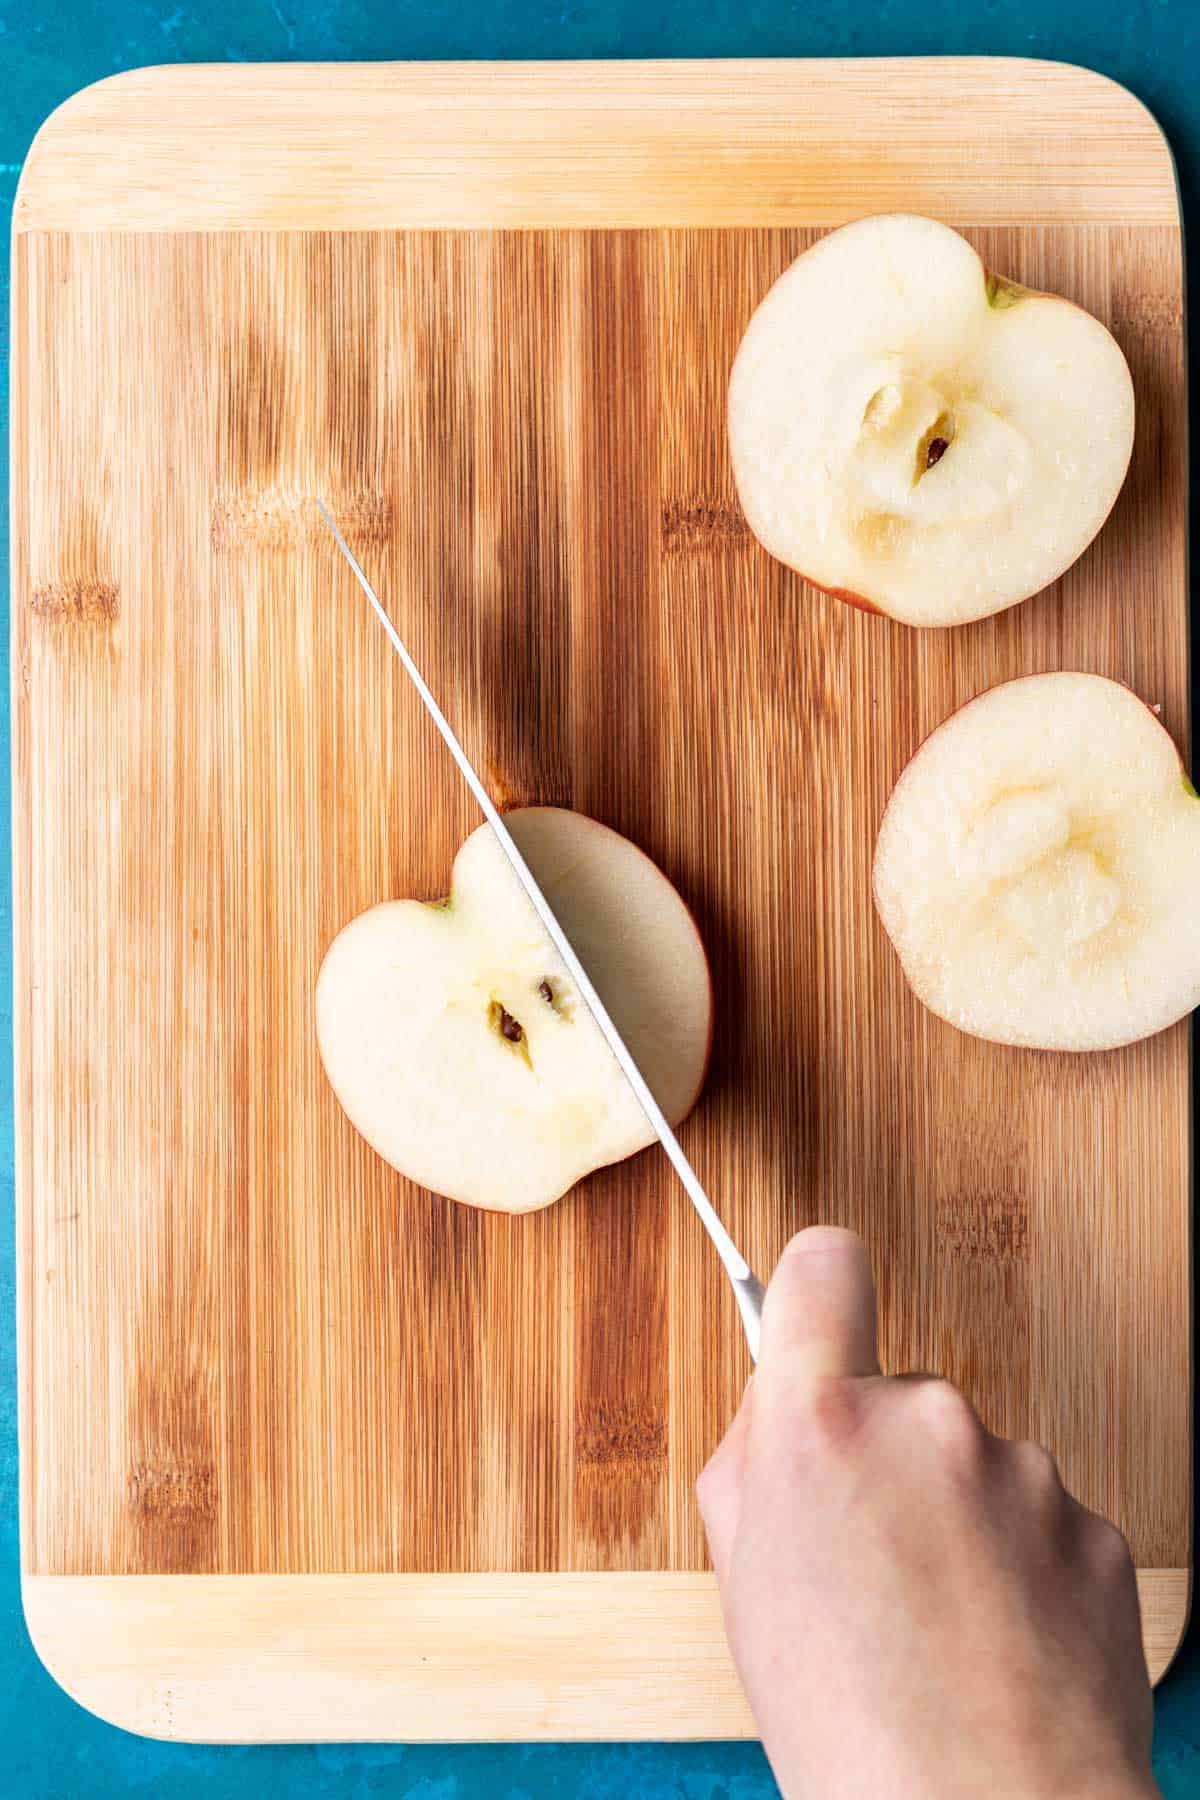 A knife cutting the remaining sides off an apple.